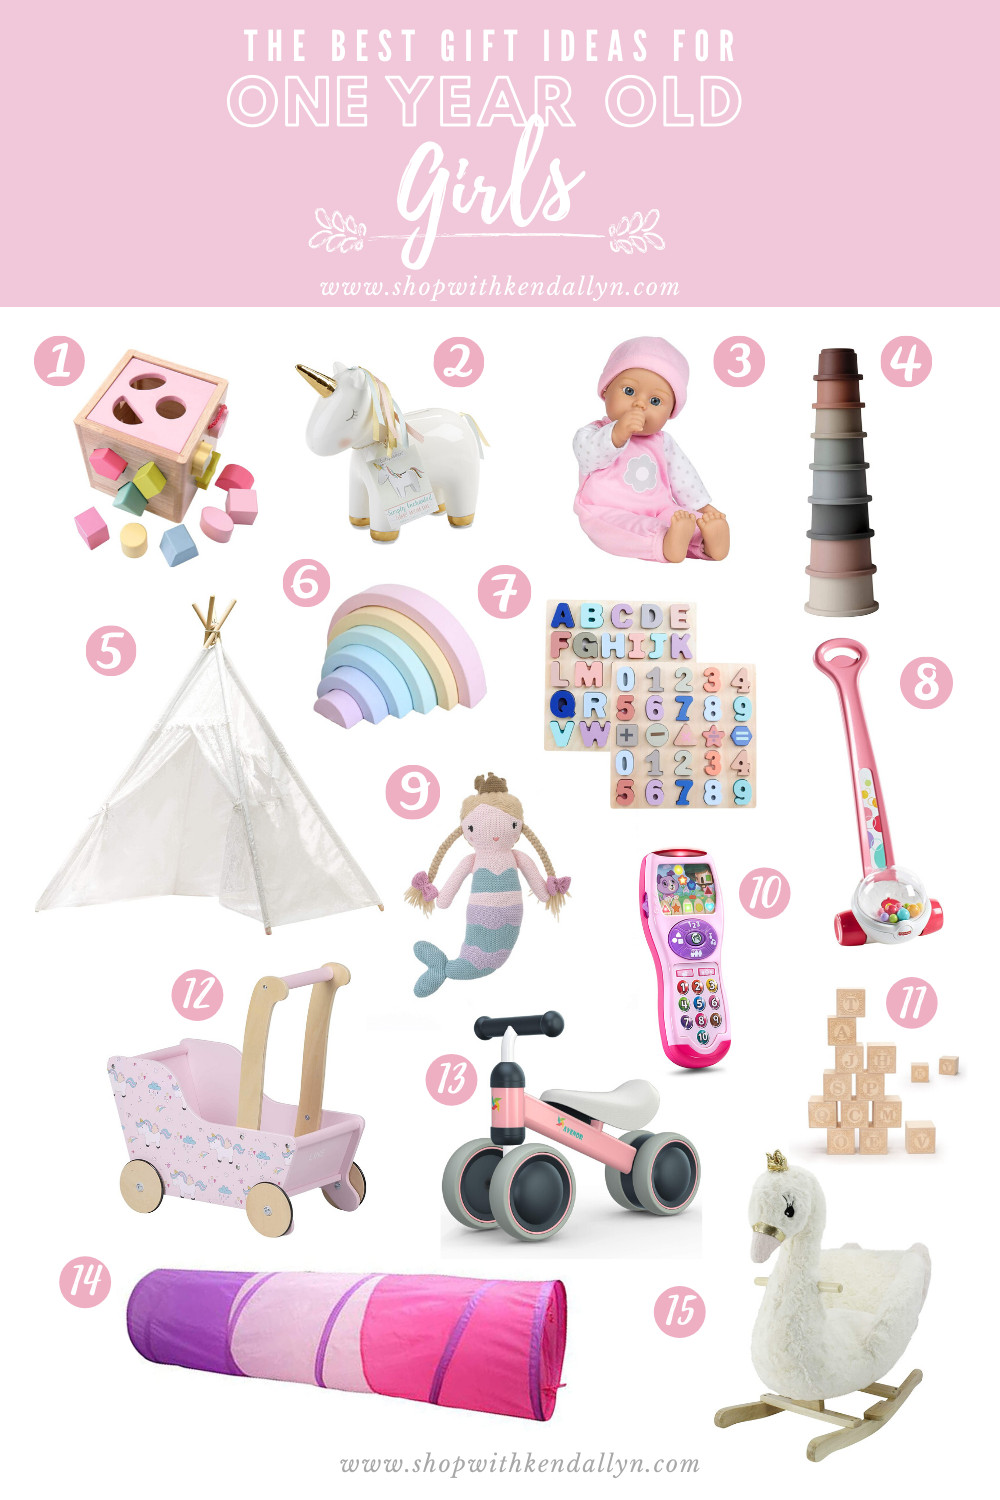 Gift Ideas For 1 Year Old Girls
 The Ultimate Gift Guide for e Year Old Girls